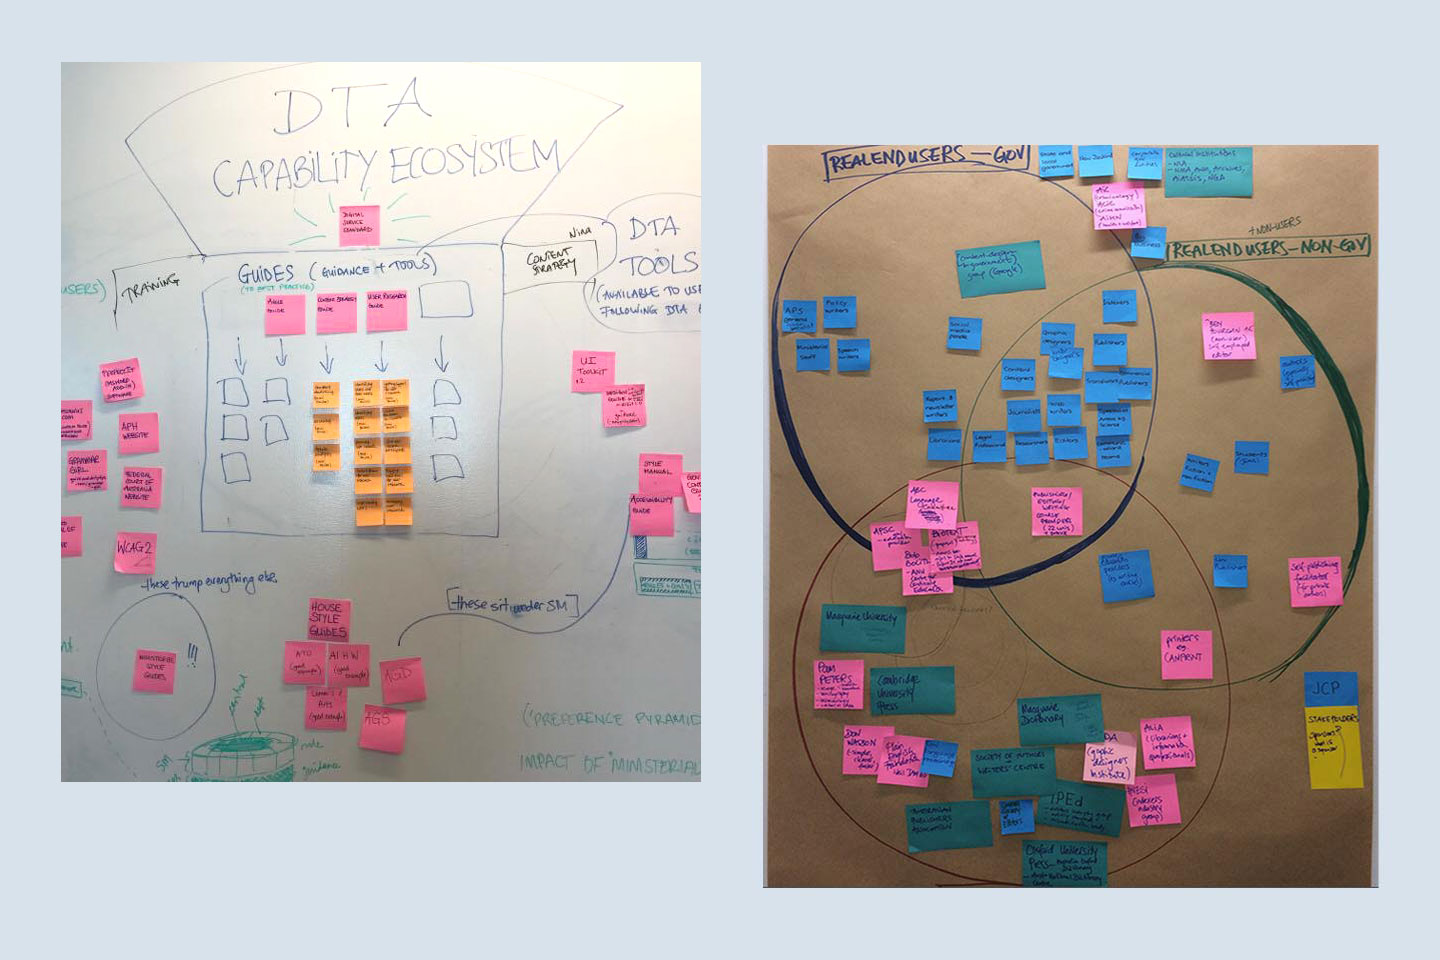 A layout including two images. The image to the left shows a white board with a sketch of the DTA's capability ecosystem. The image to the right is a venn diagram outlining the different users of the style guide and their needs. 